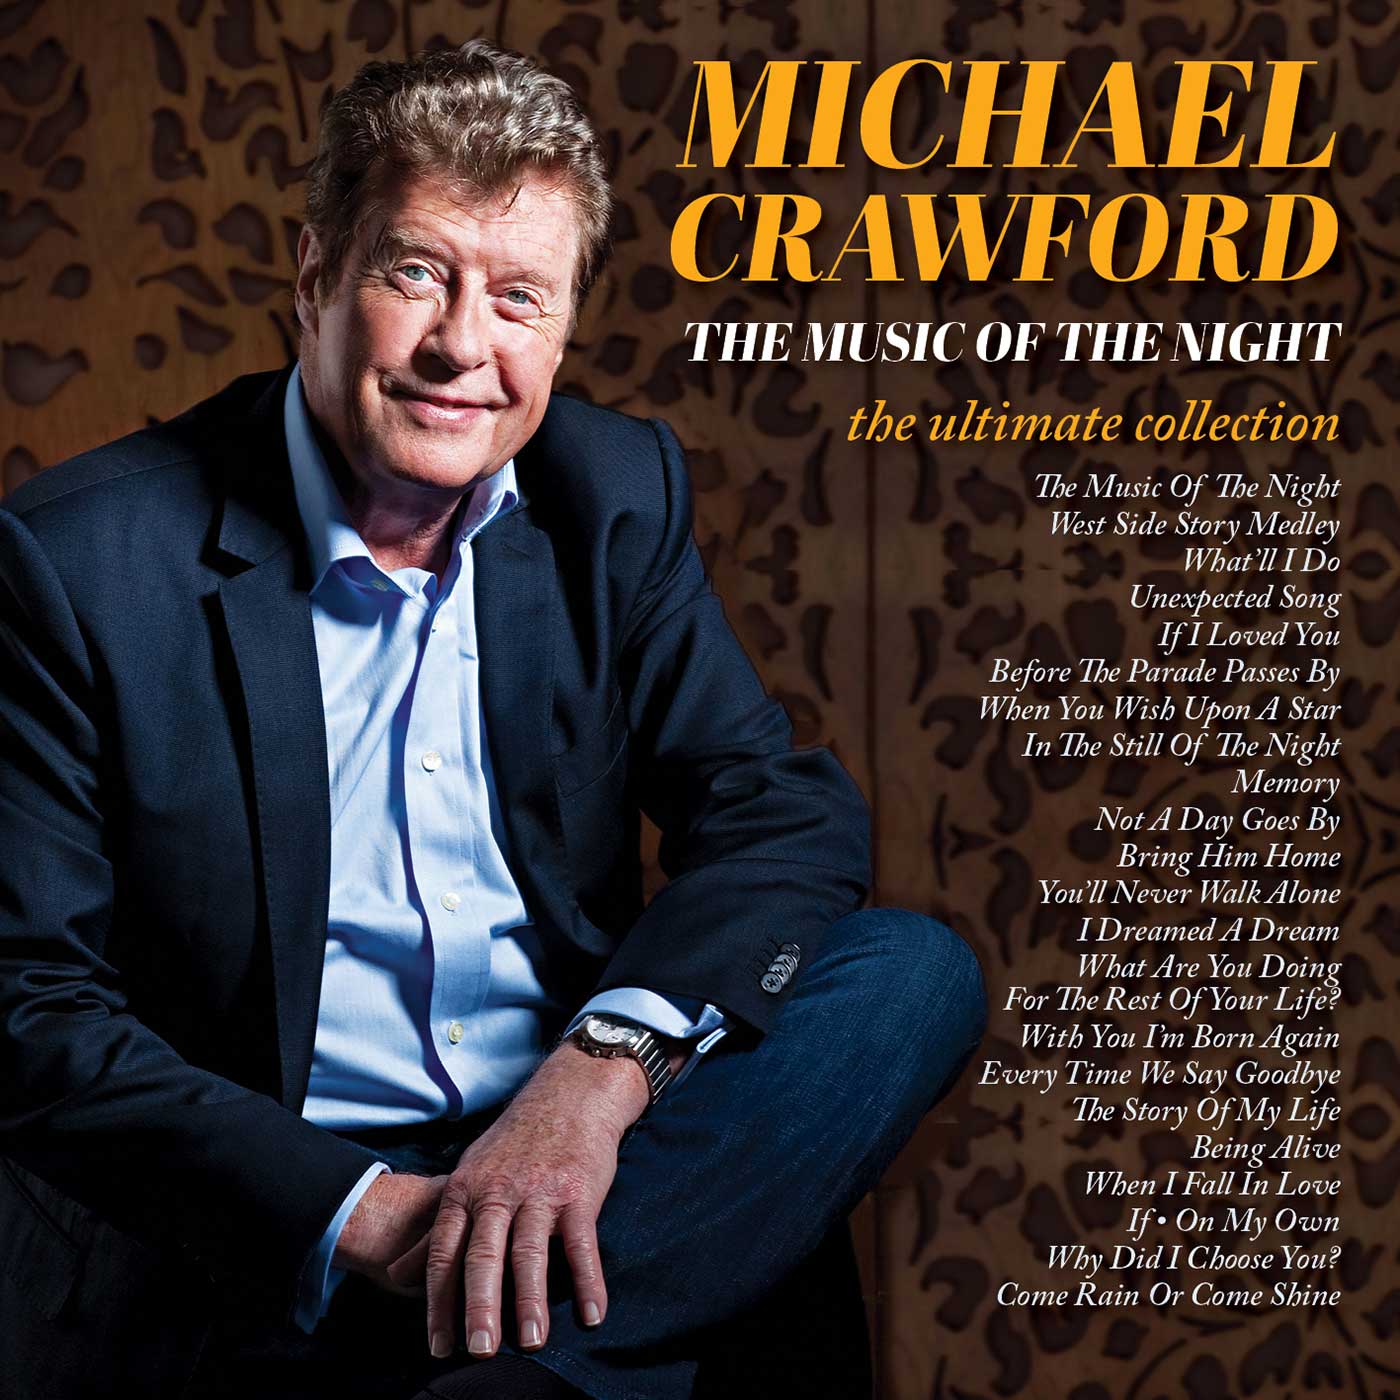 MICHAEL CRAWFORD - THE MUSIC OF THE NIGHT